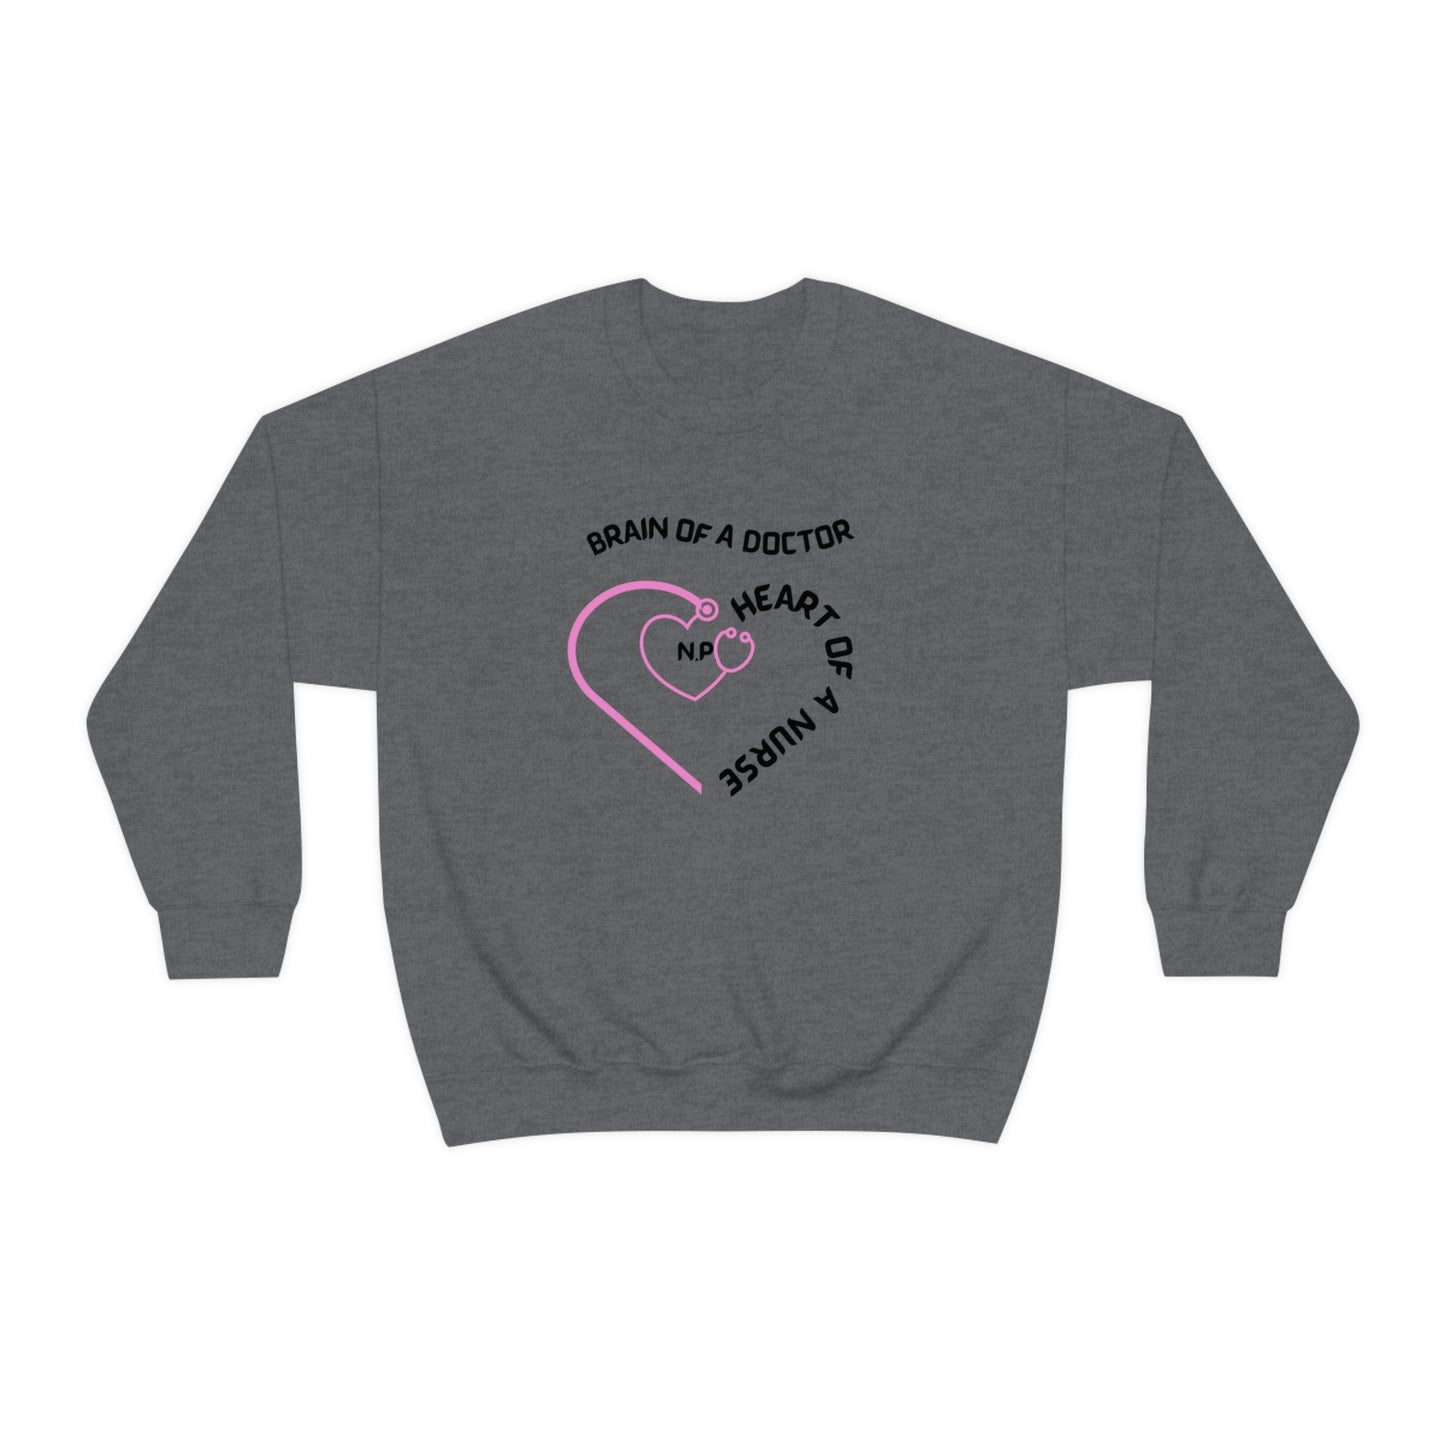 AWESOME SWEATSHIRT GIFT FOR NURSE PRACTITIONER